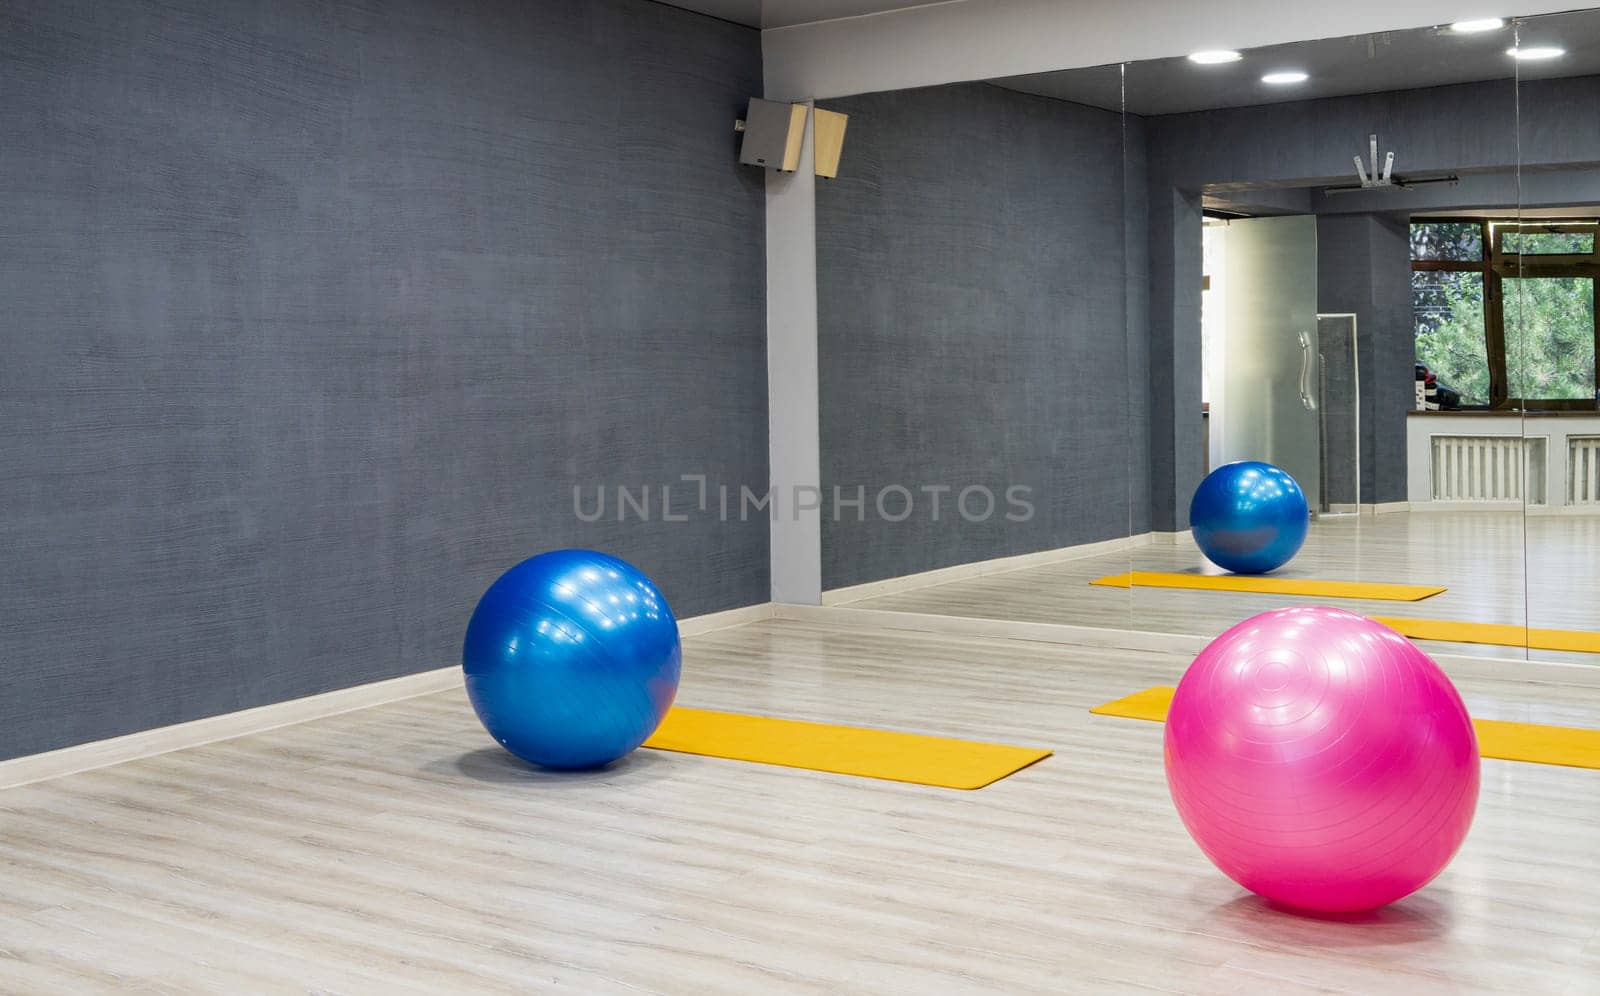 The exercise balls in the sports complex by A_Karim